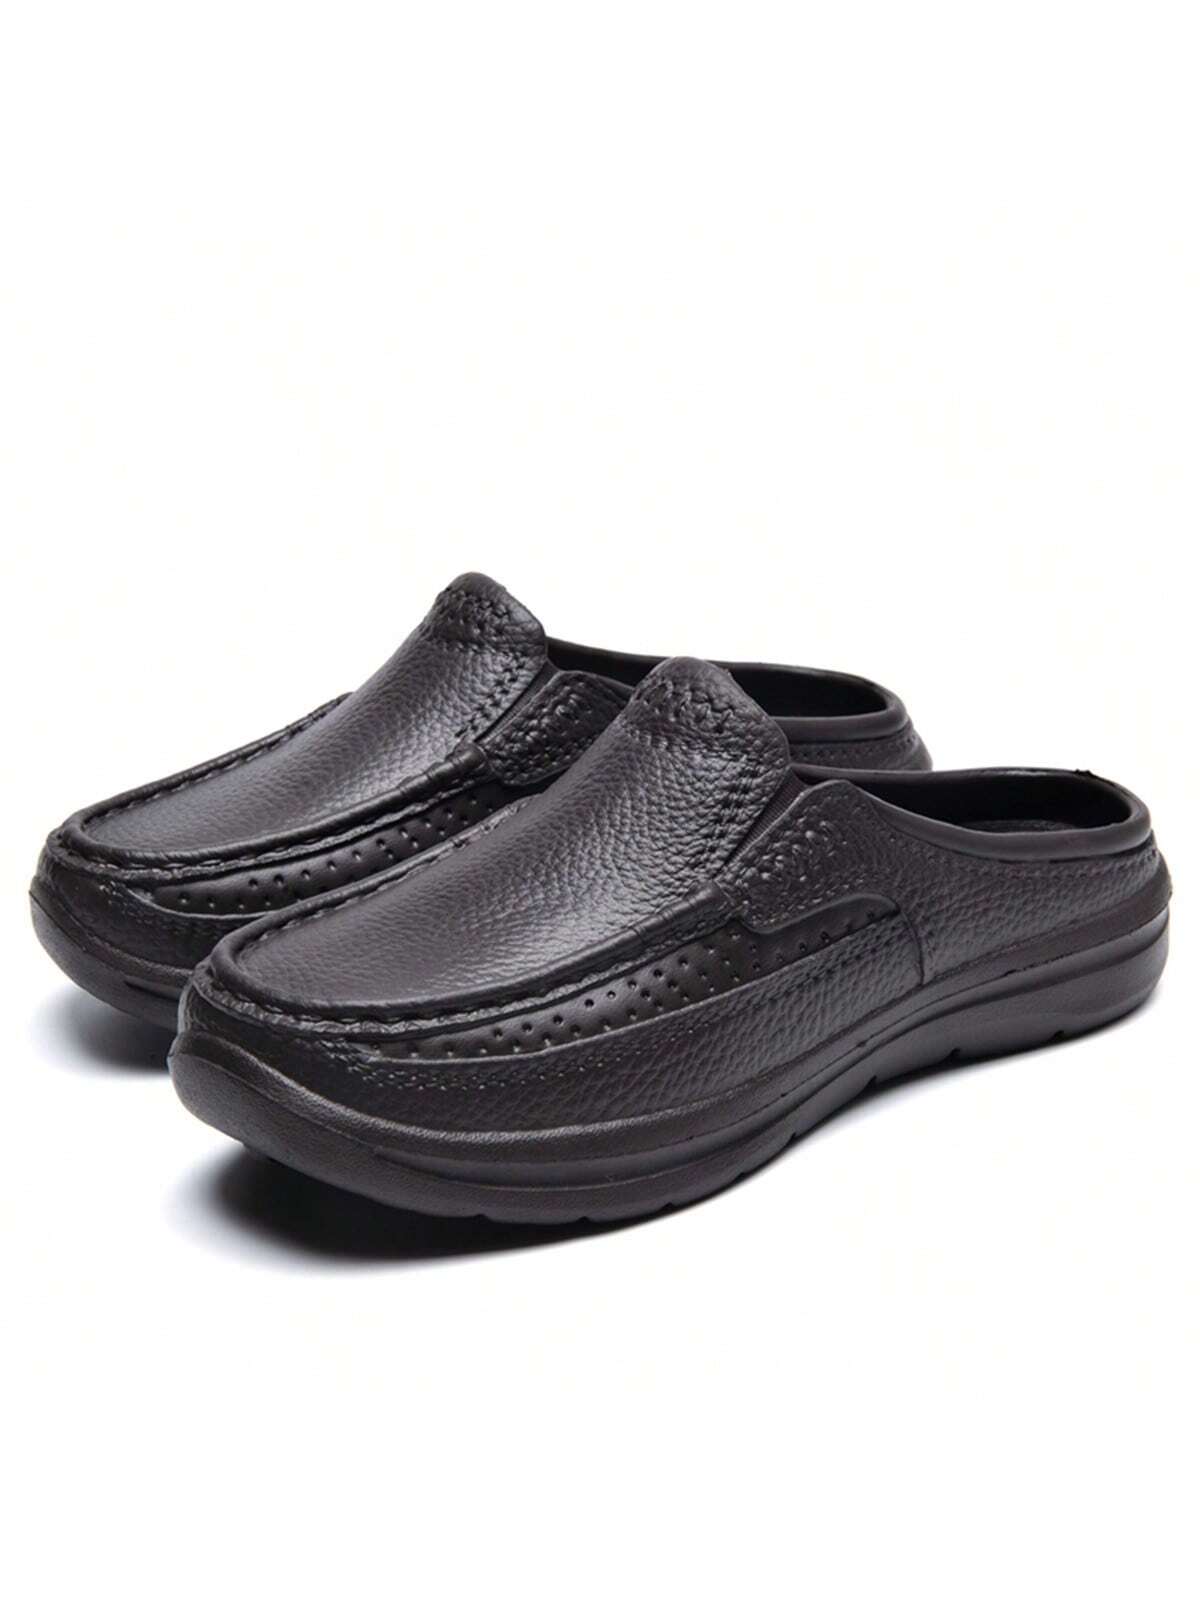 Simple Slip-on Men's Half Slippers With Non-slip Pu Leather Outsole, Suitable For Driving And Chef Work